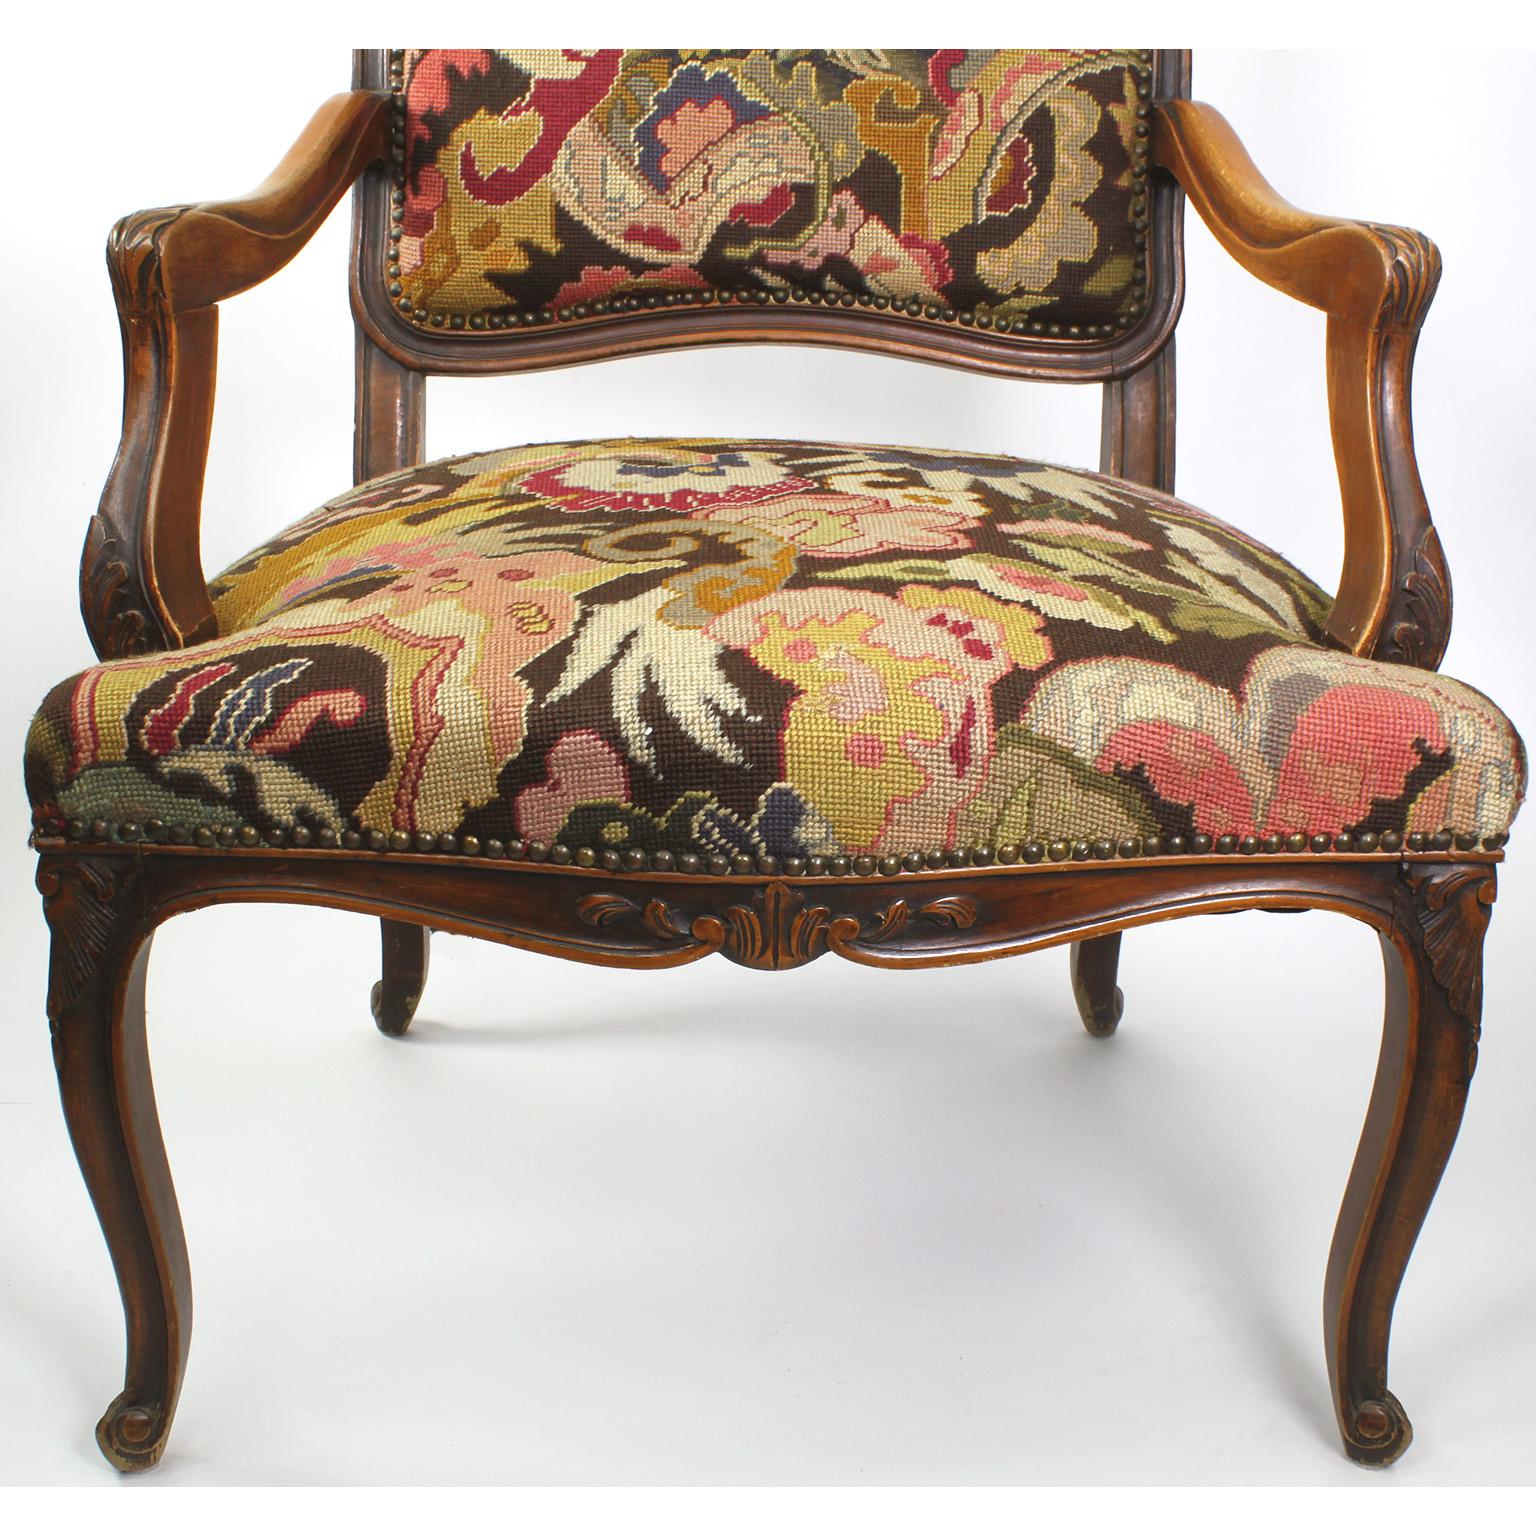 Early 20th Century Fine Country French Louis XV Style Carved Walnut and Needlepoint Armchair For Sale